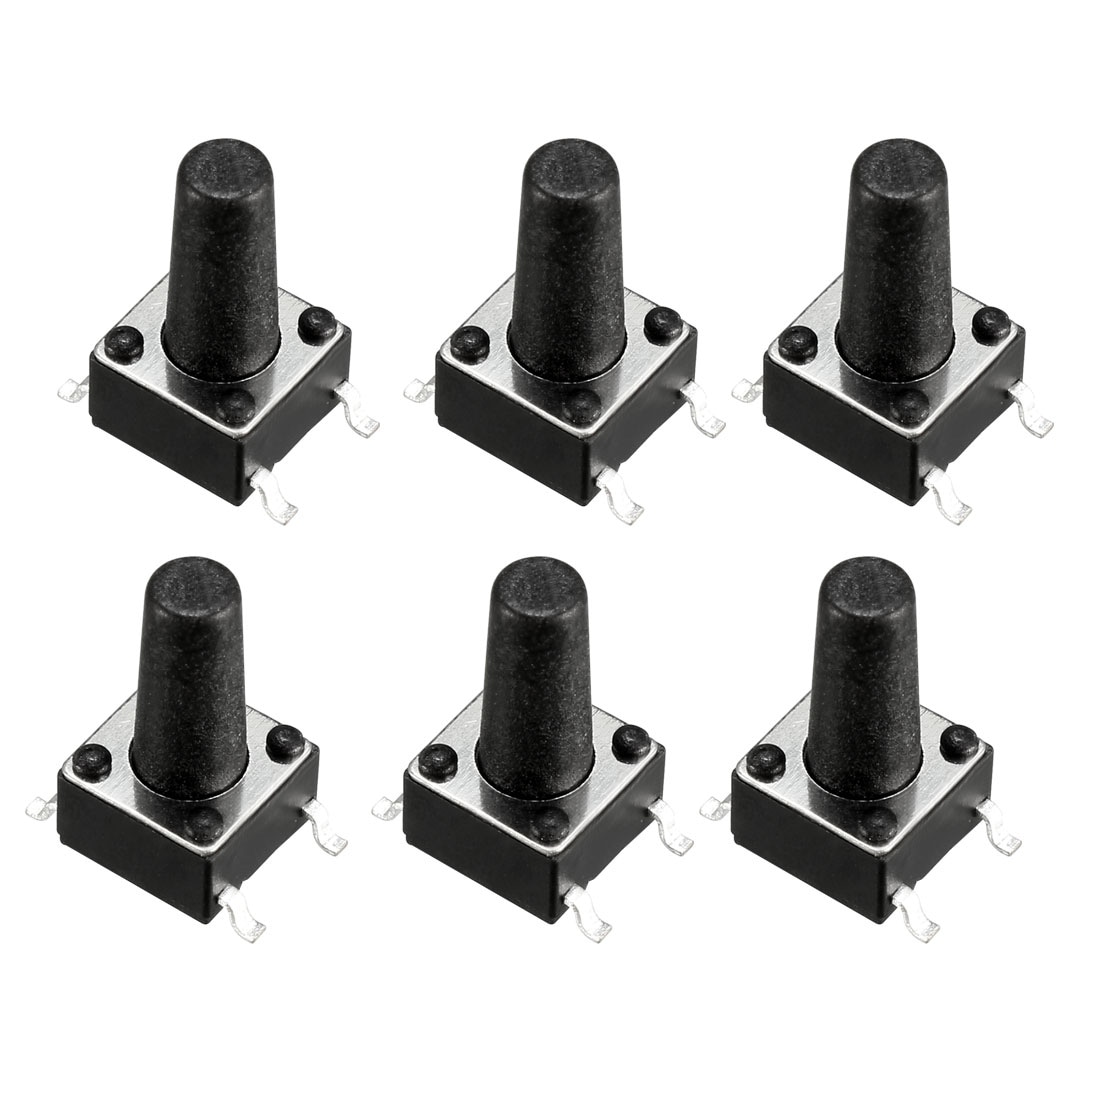 6x6x6 Tactile Switch/Keyboard Push Button/PCB/4 Pin/SMD/SMT/Micro/Connector/B-36